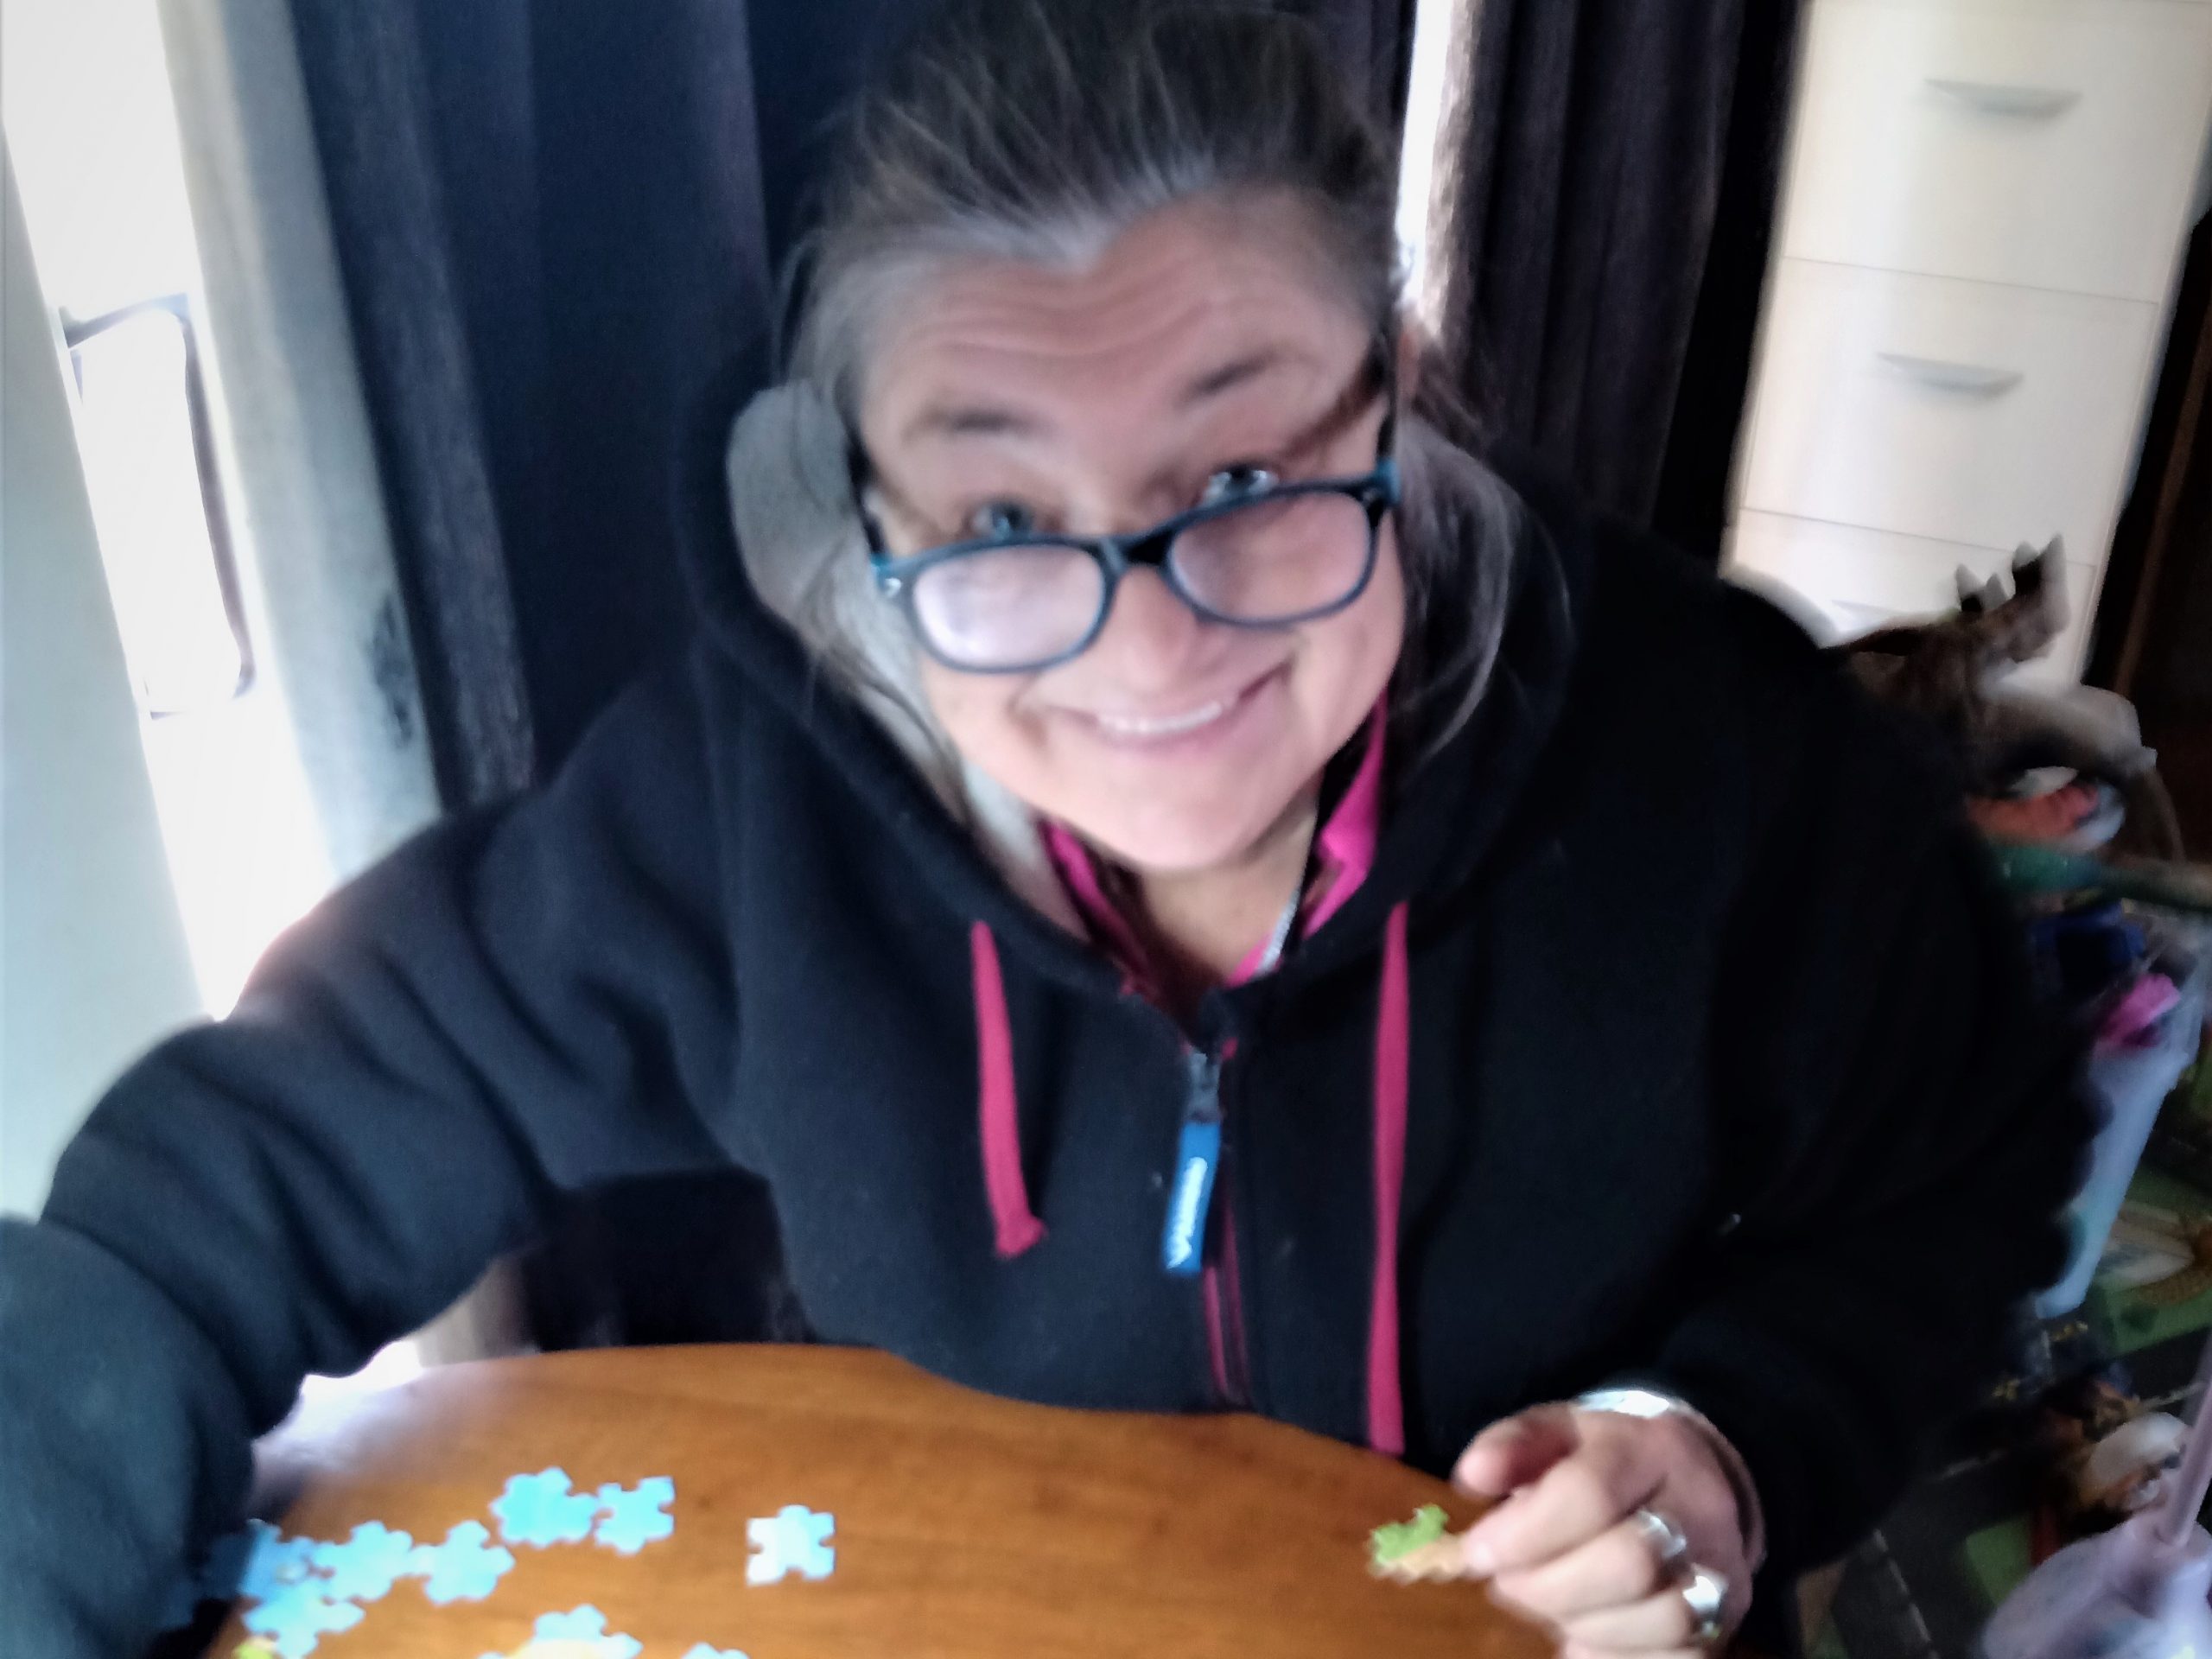 Putting the puzzle together - Helen's story